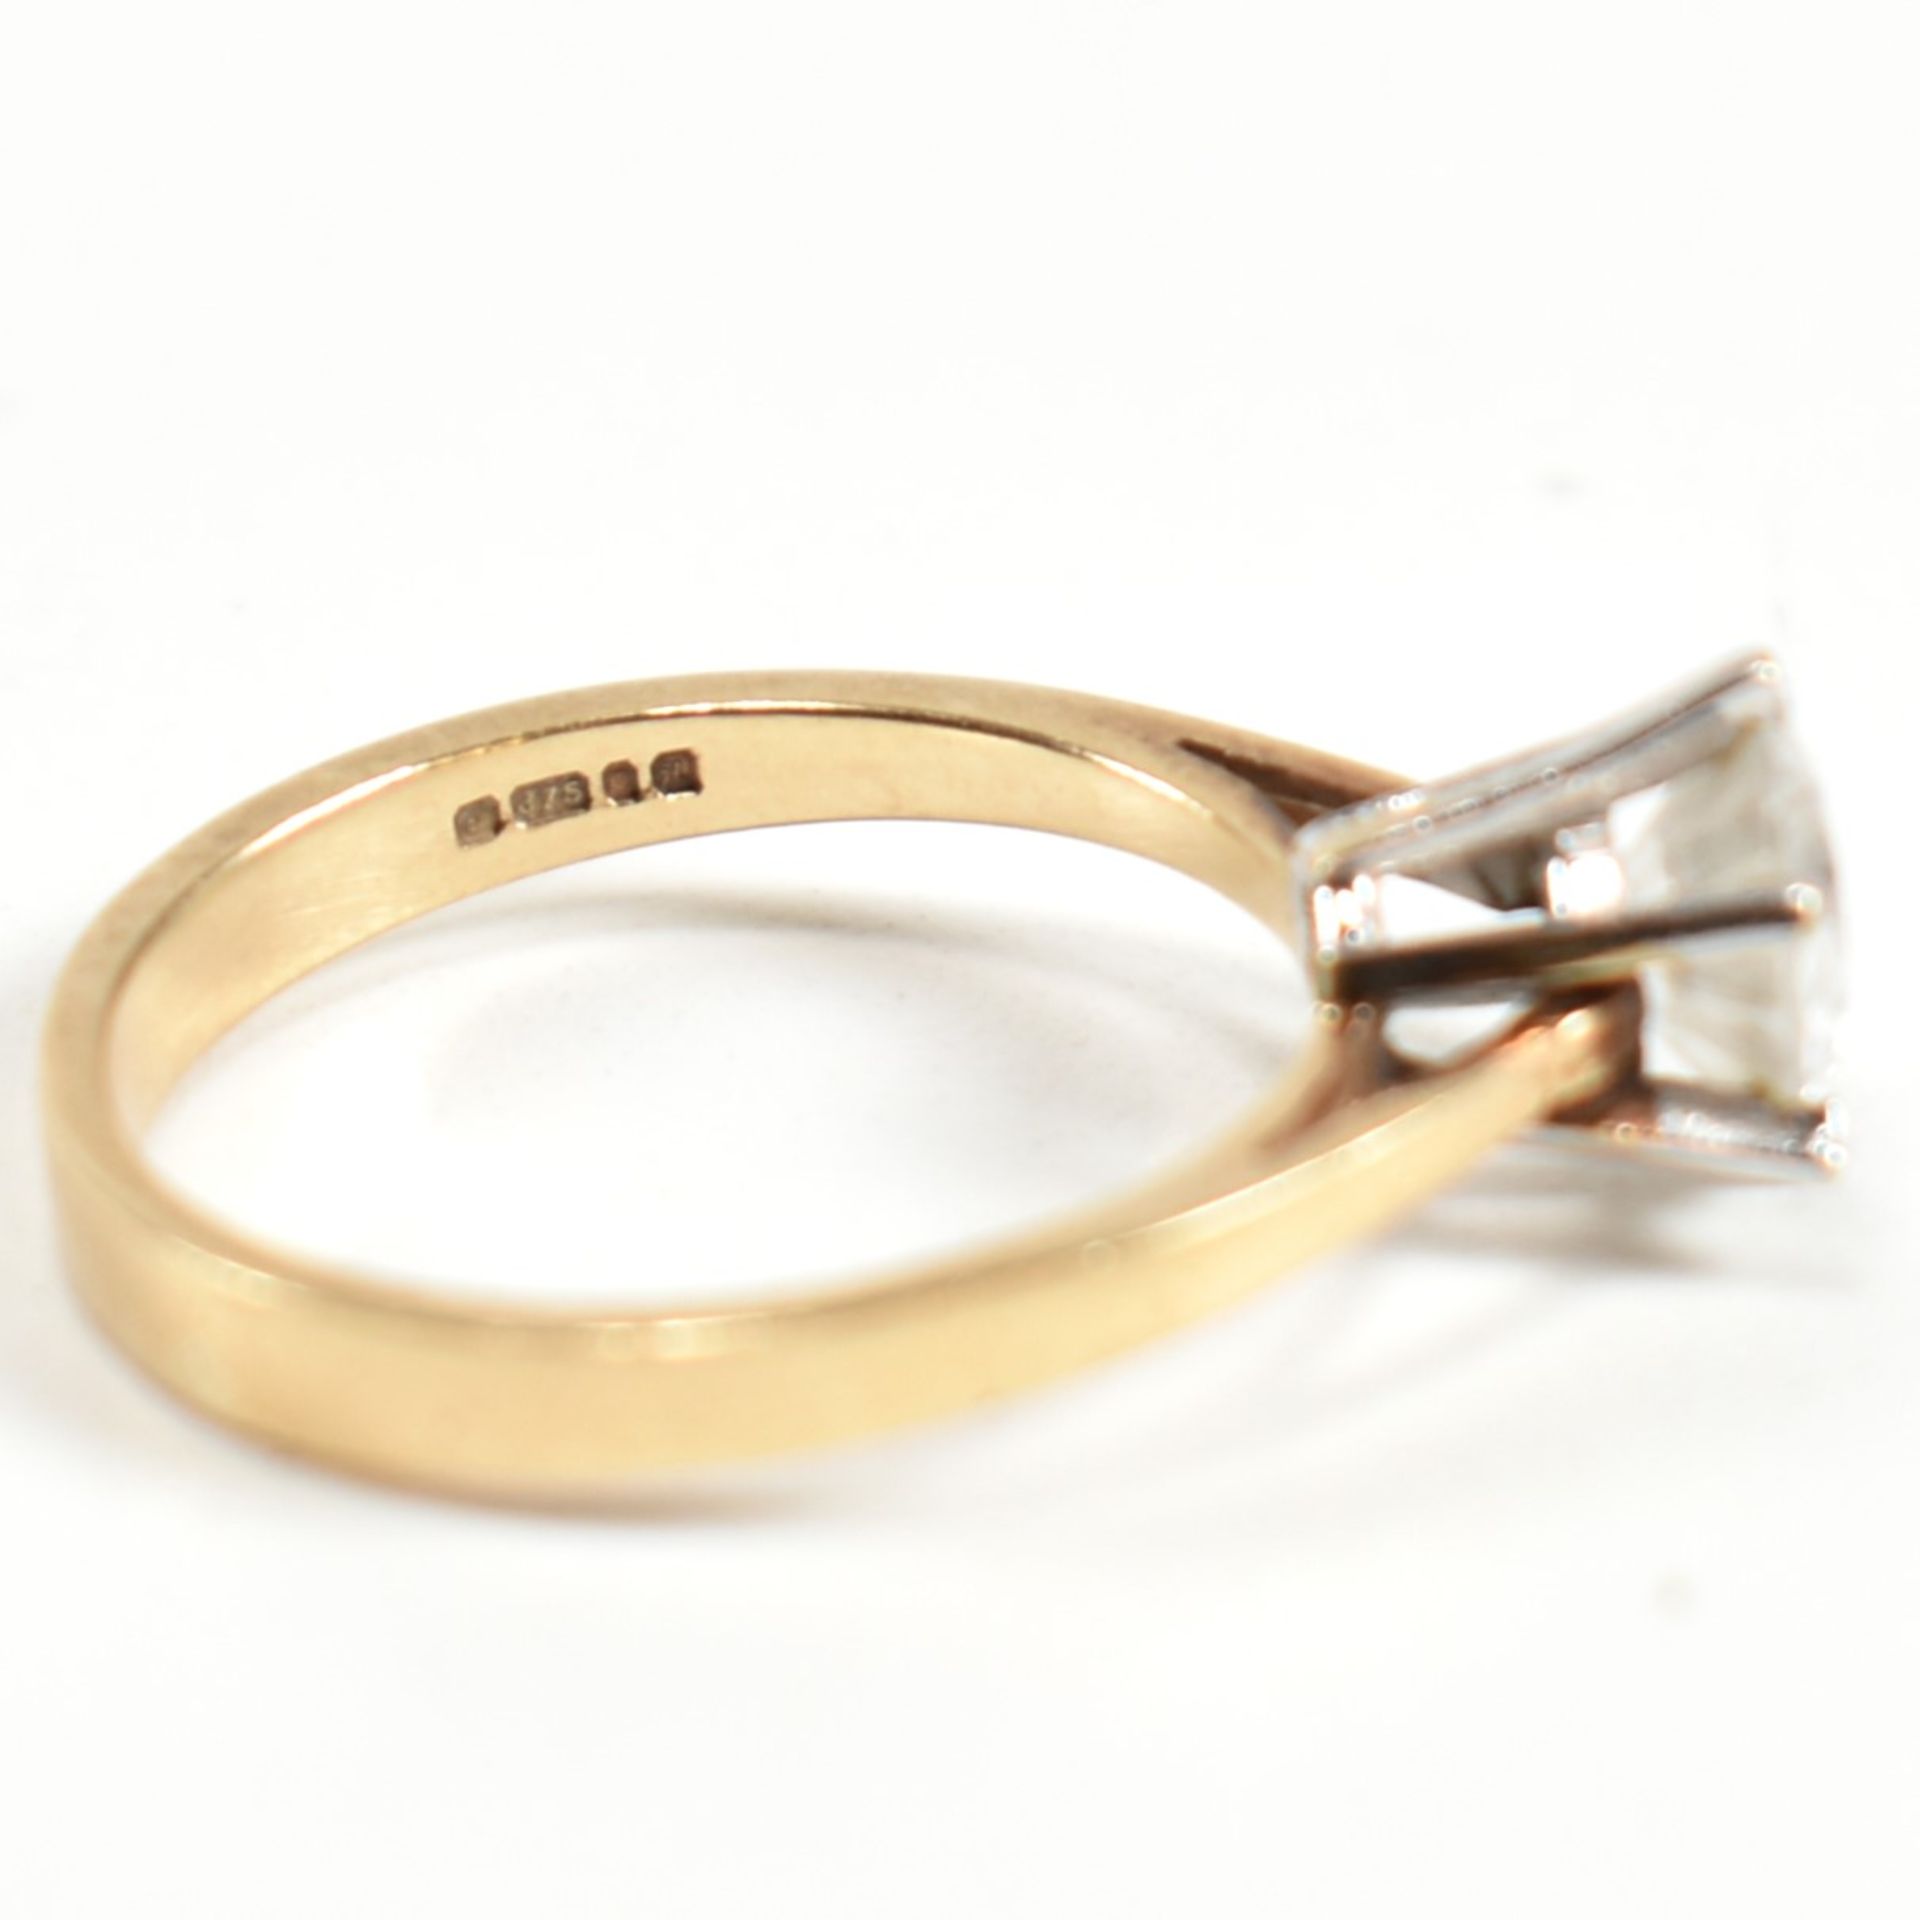 HALLMARKED 9CT GOLD & CZ SOLITAIRE RING - Image 5 of 8